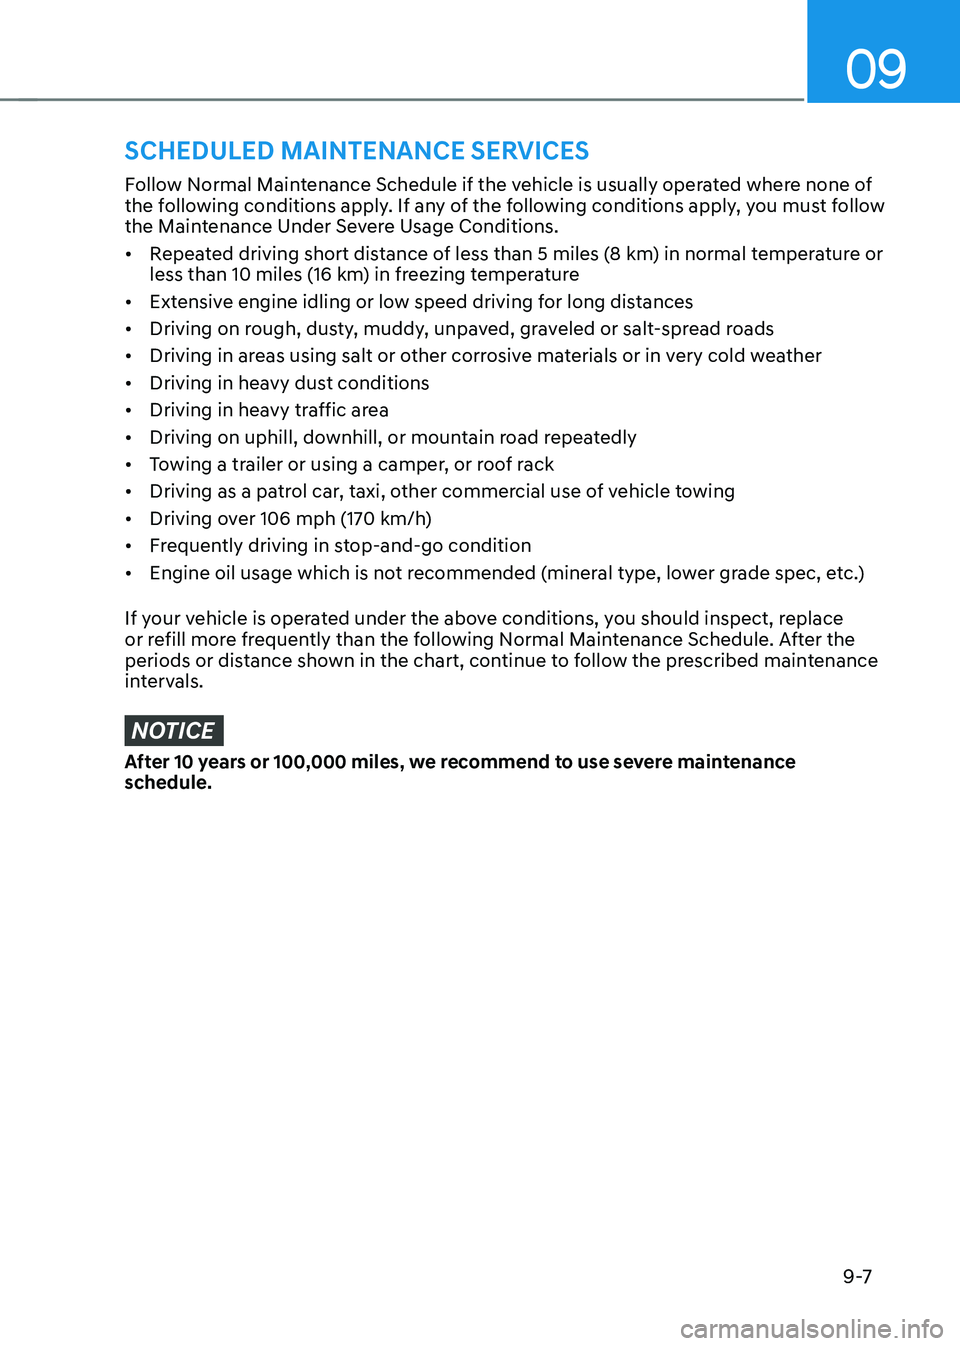 GENESIS GV80 2021  Owners Manual 09
9 -7
Follow Normal Maintenance Schedule if the vehicle is usually operated where none of 
the following conditions apply. If any of the following conditions apply, you must follow 
the Maintenance 